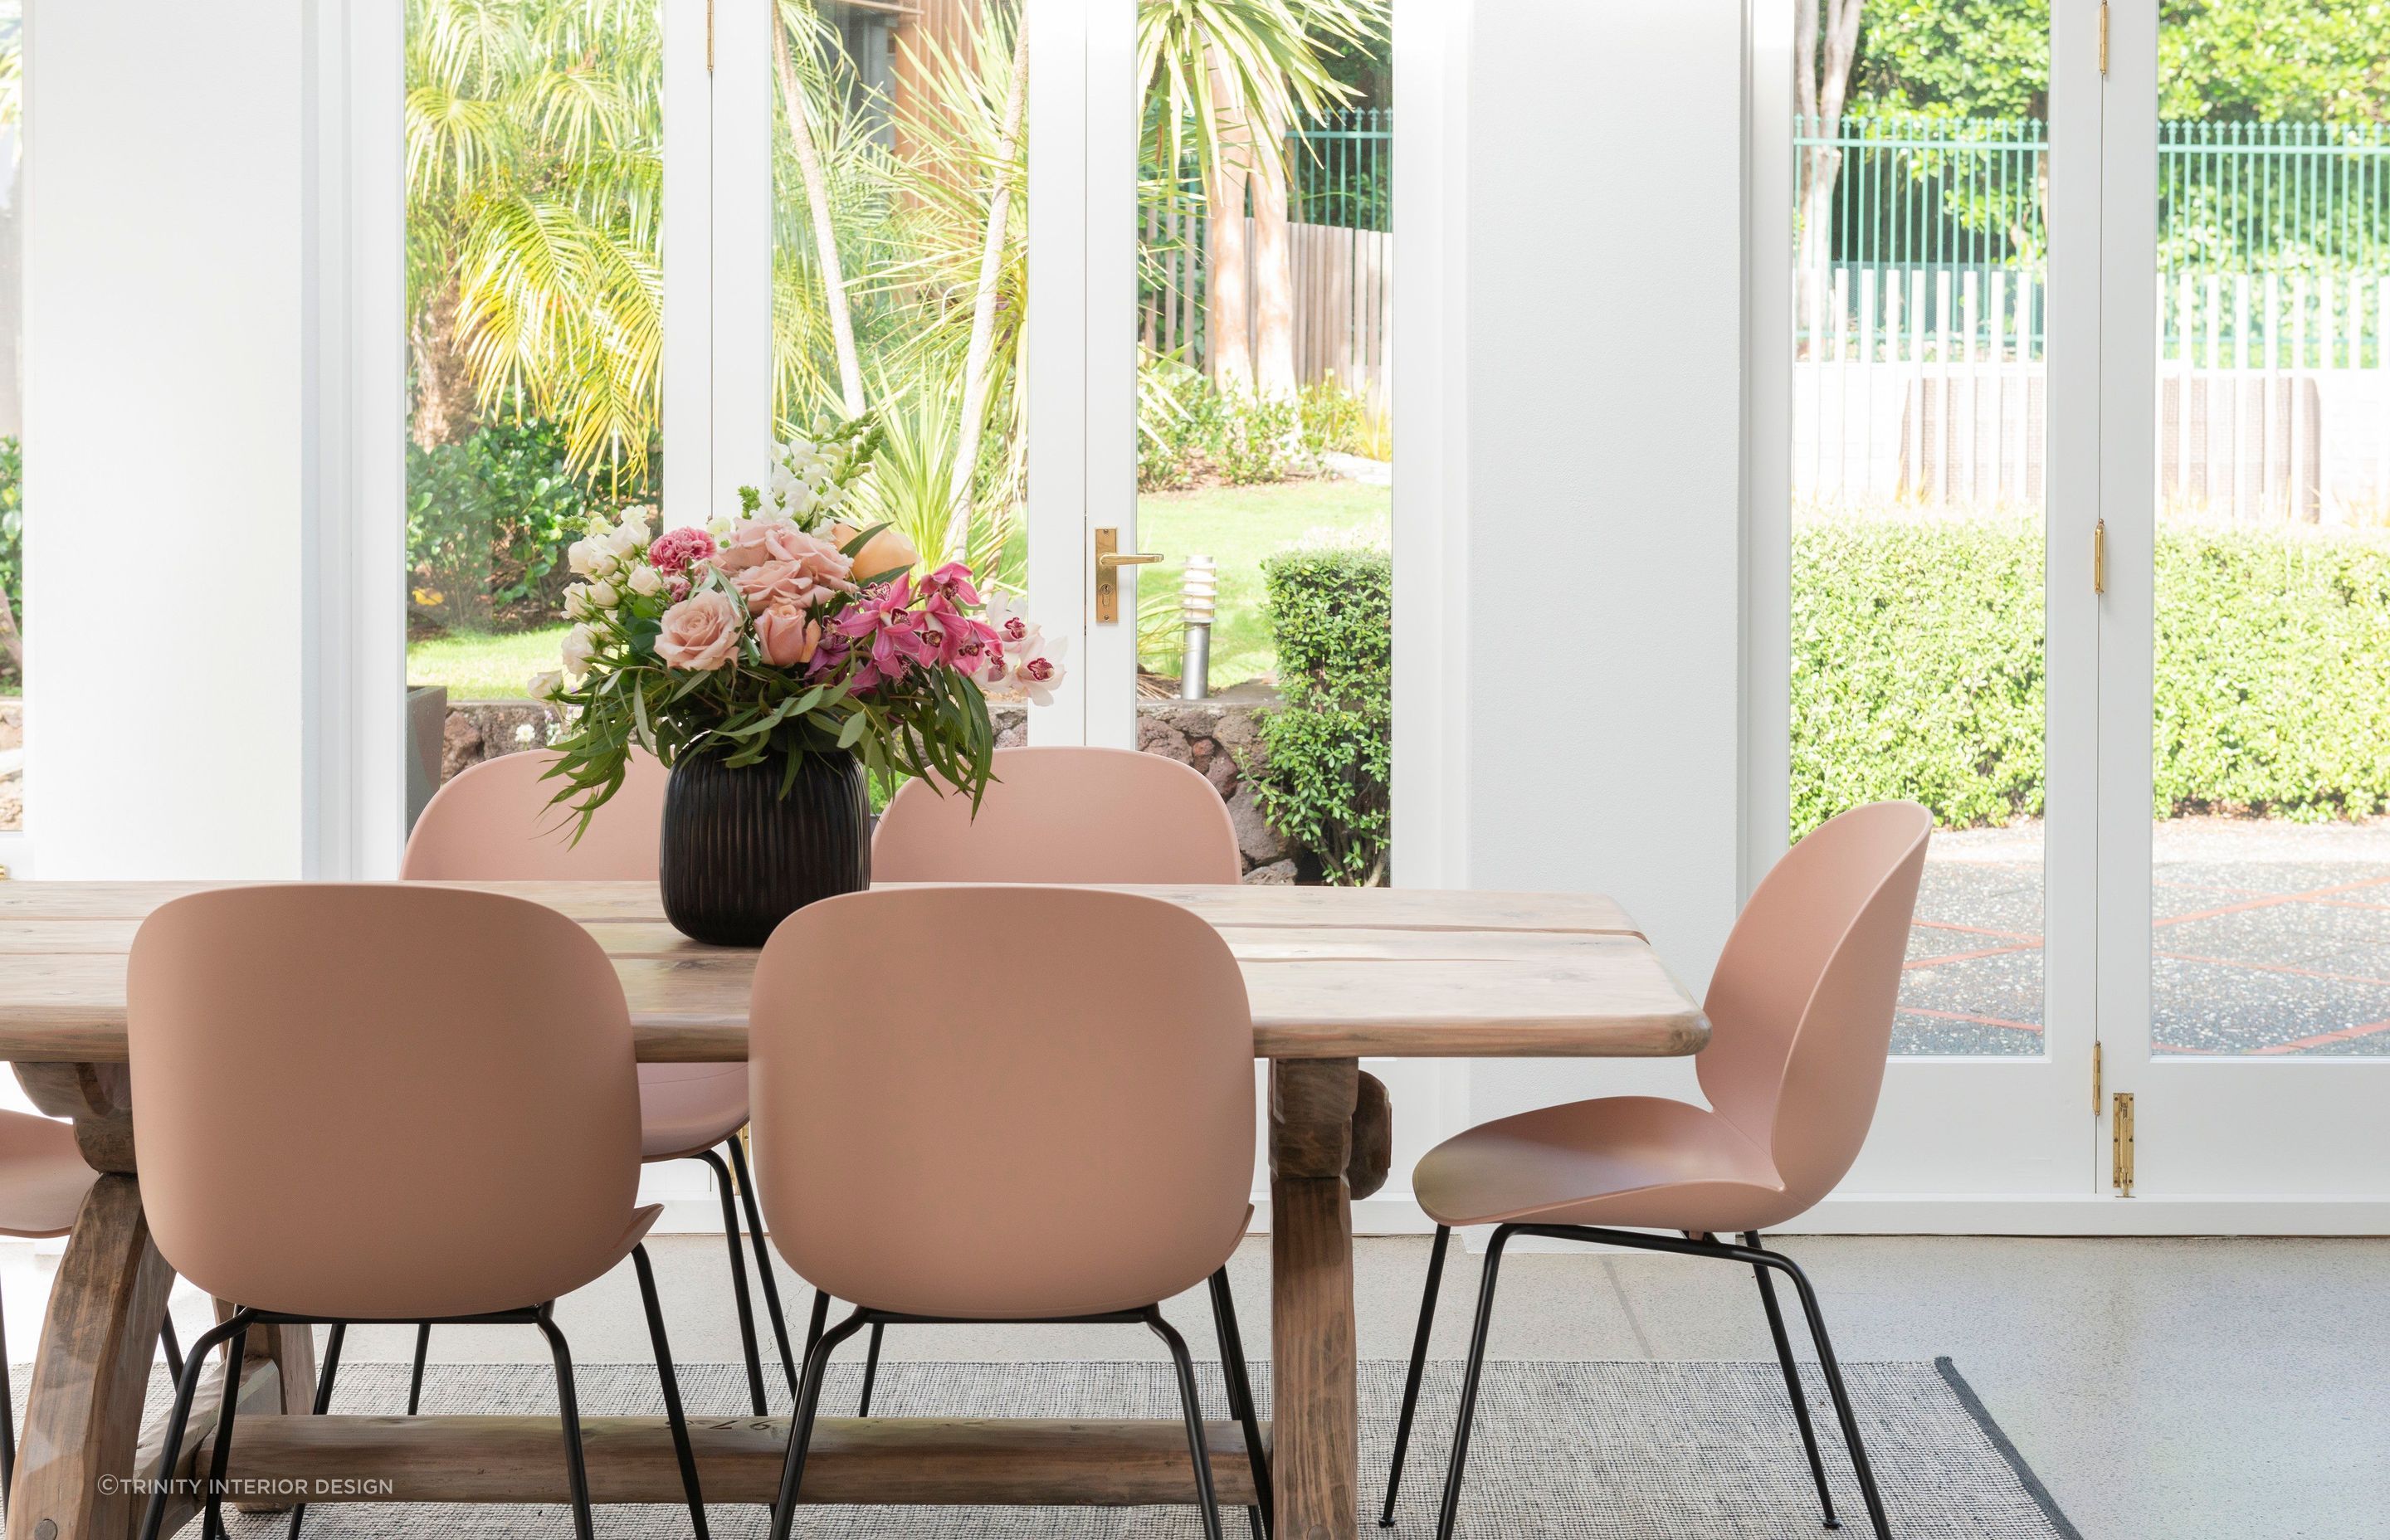 Natural materials and pastel colours create a warm and inviting atmosphere in this stylish dining room